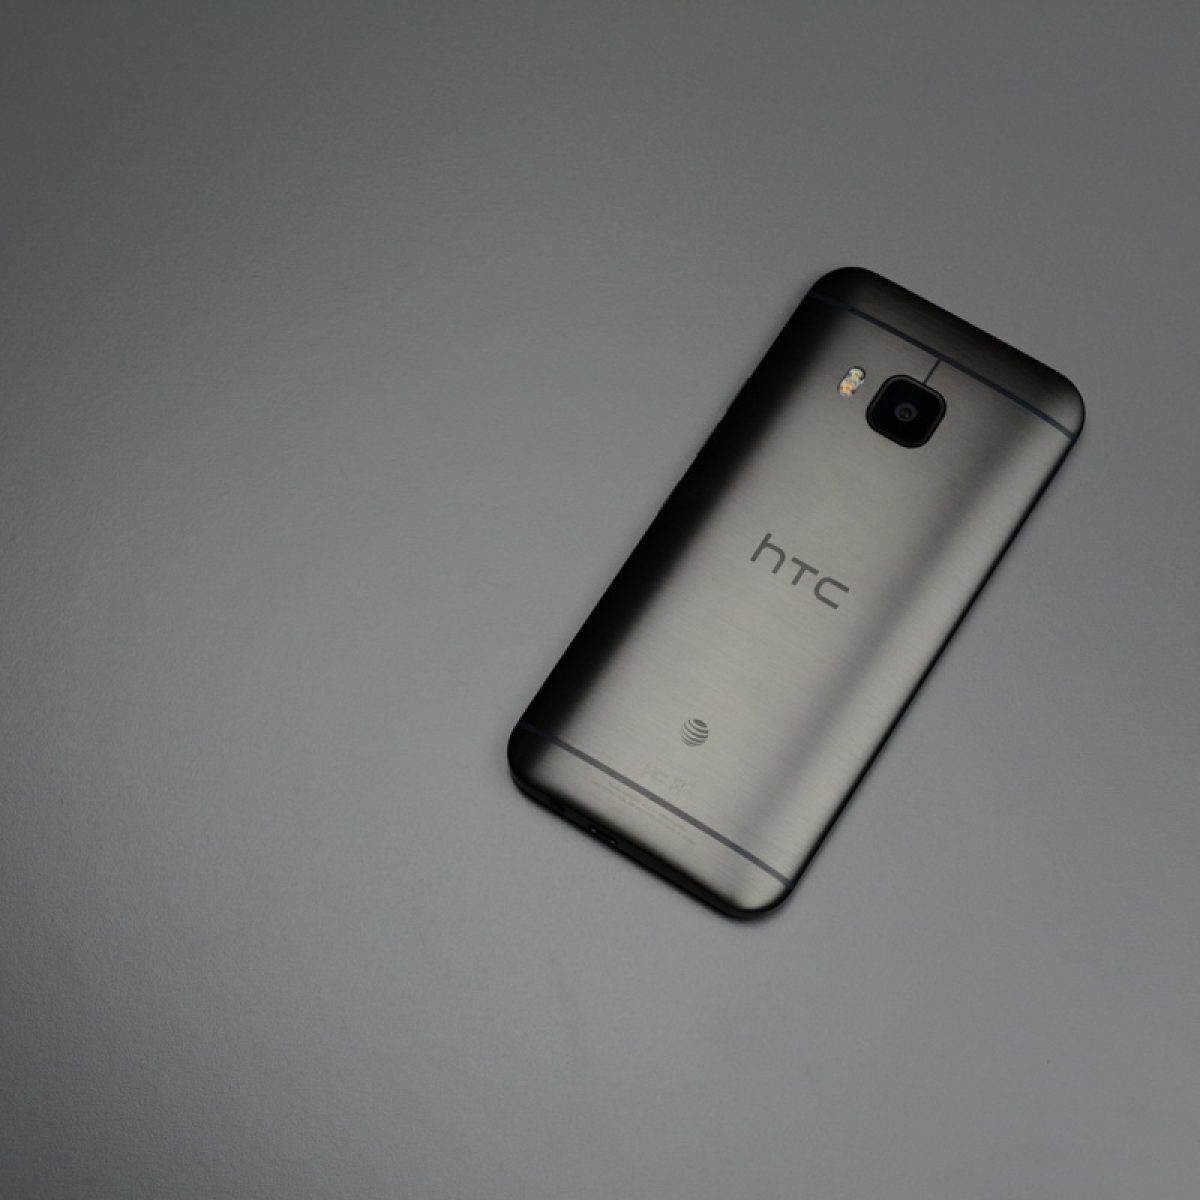 HTC One Review